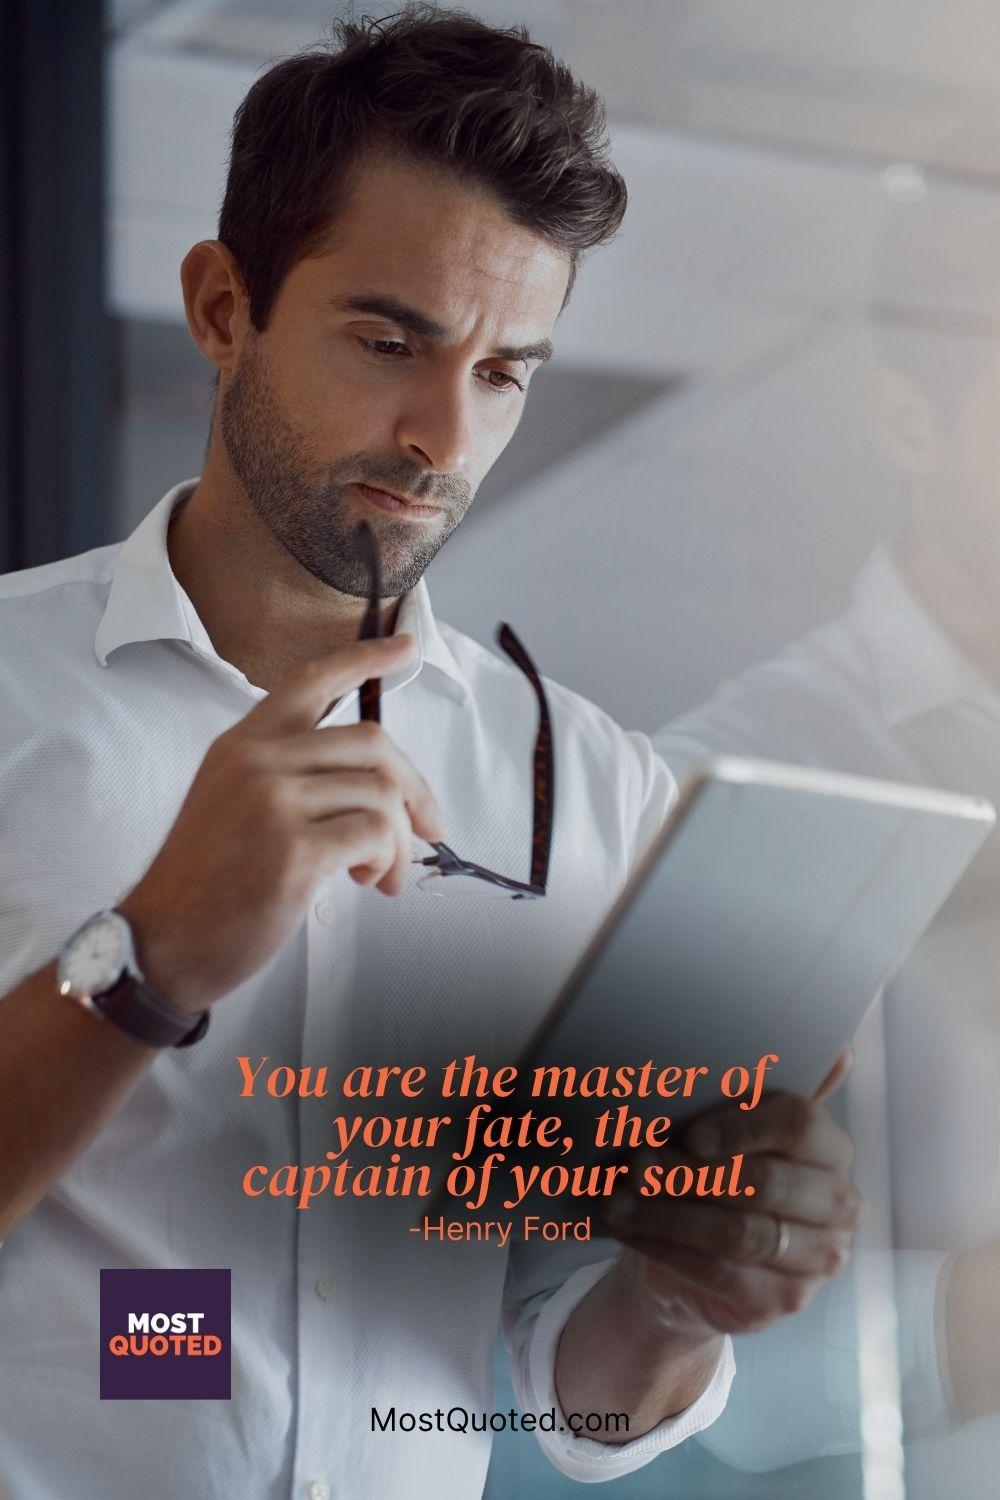 You are the master of your fate, the captain of your soul. - Henry Ford